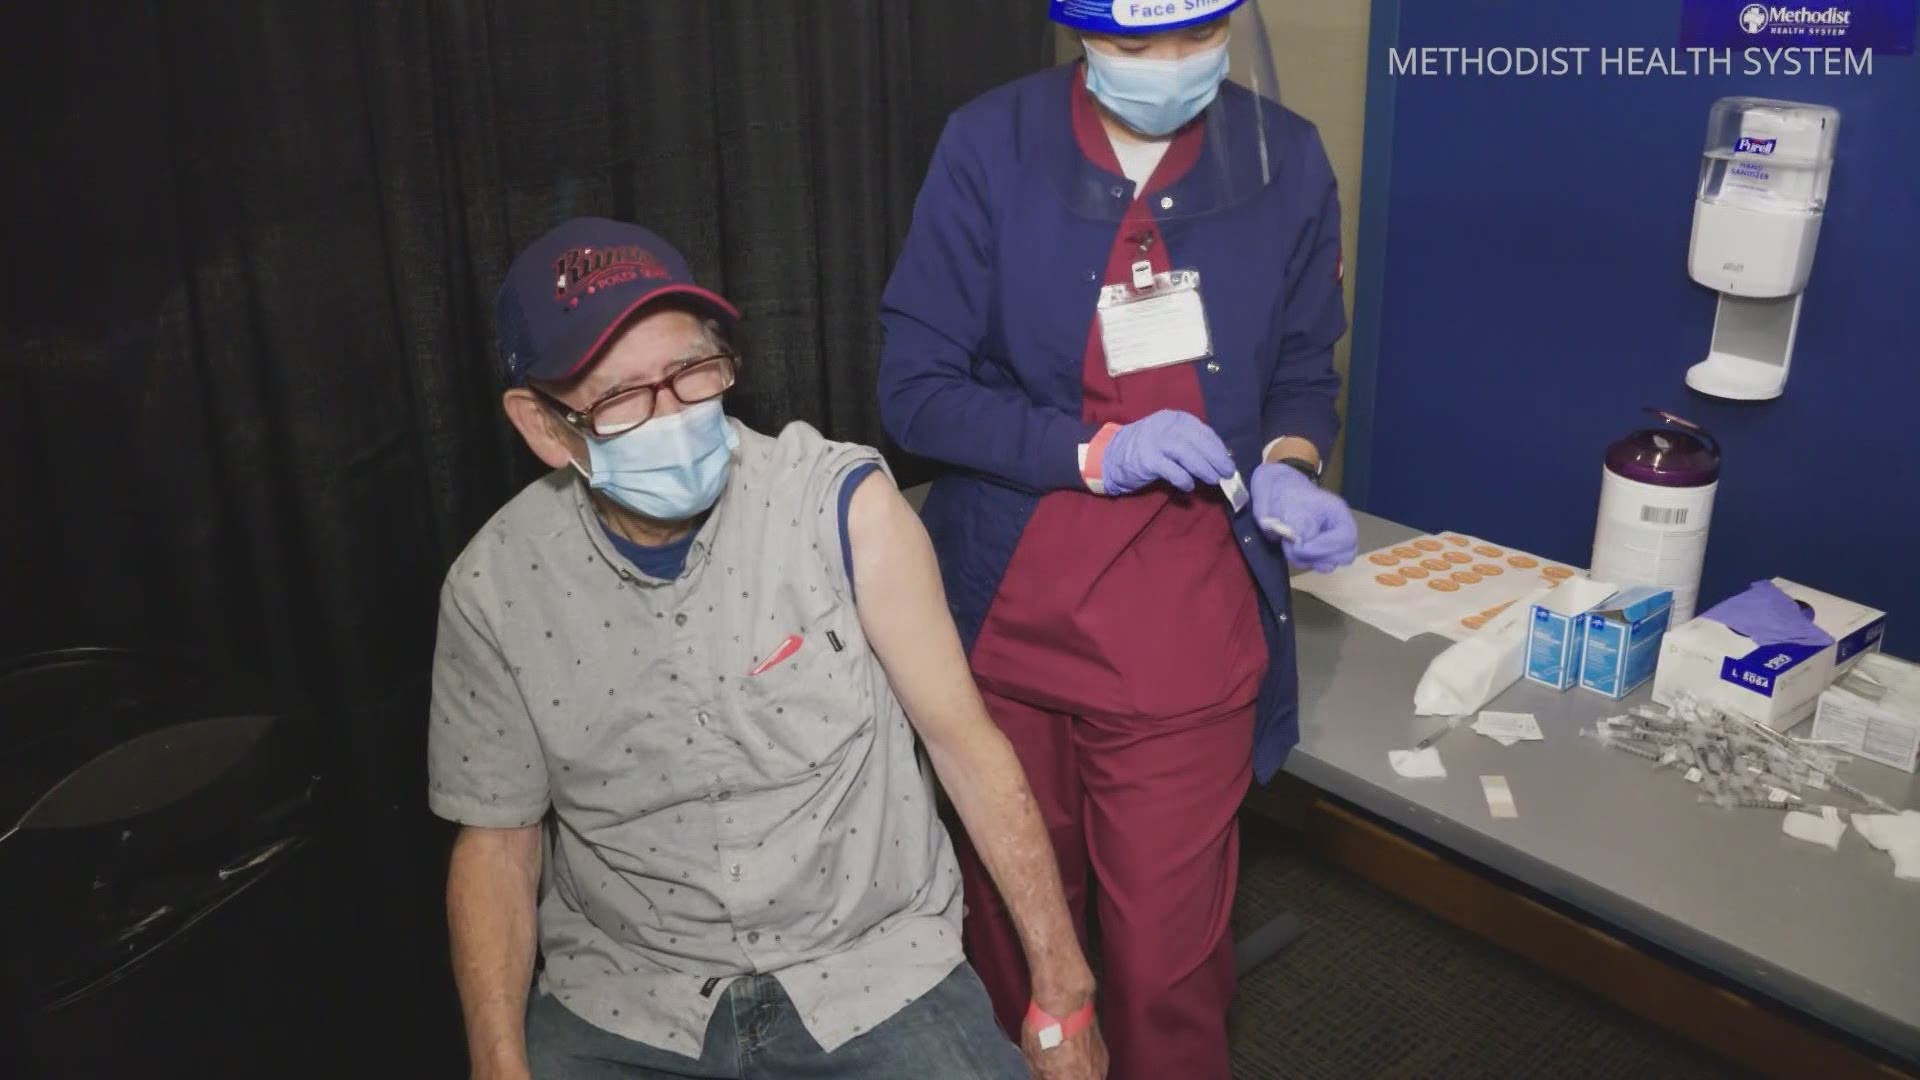 The City of Dallas and Methodist Health System have partnered together to distribute 3,000 doses of Pfizer's COVID-19 vaccine to the public.